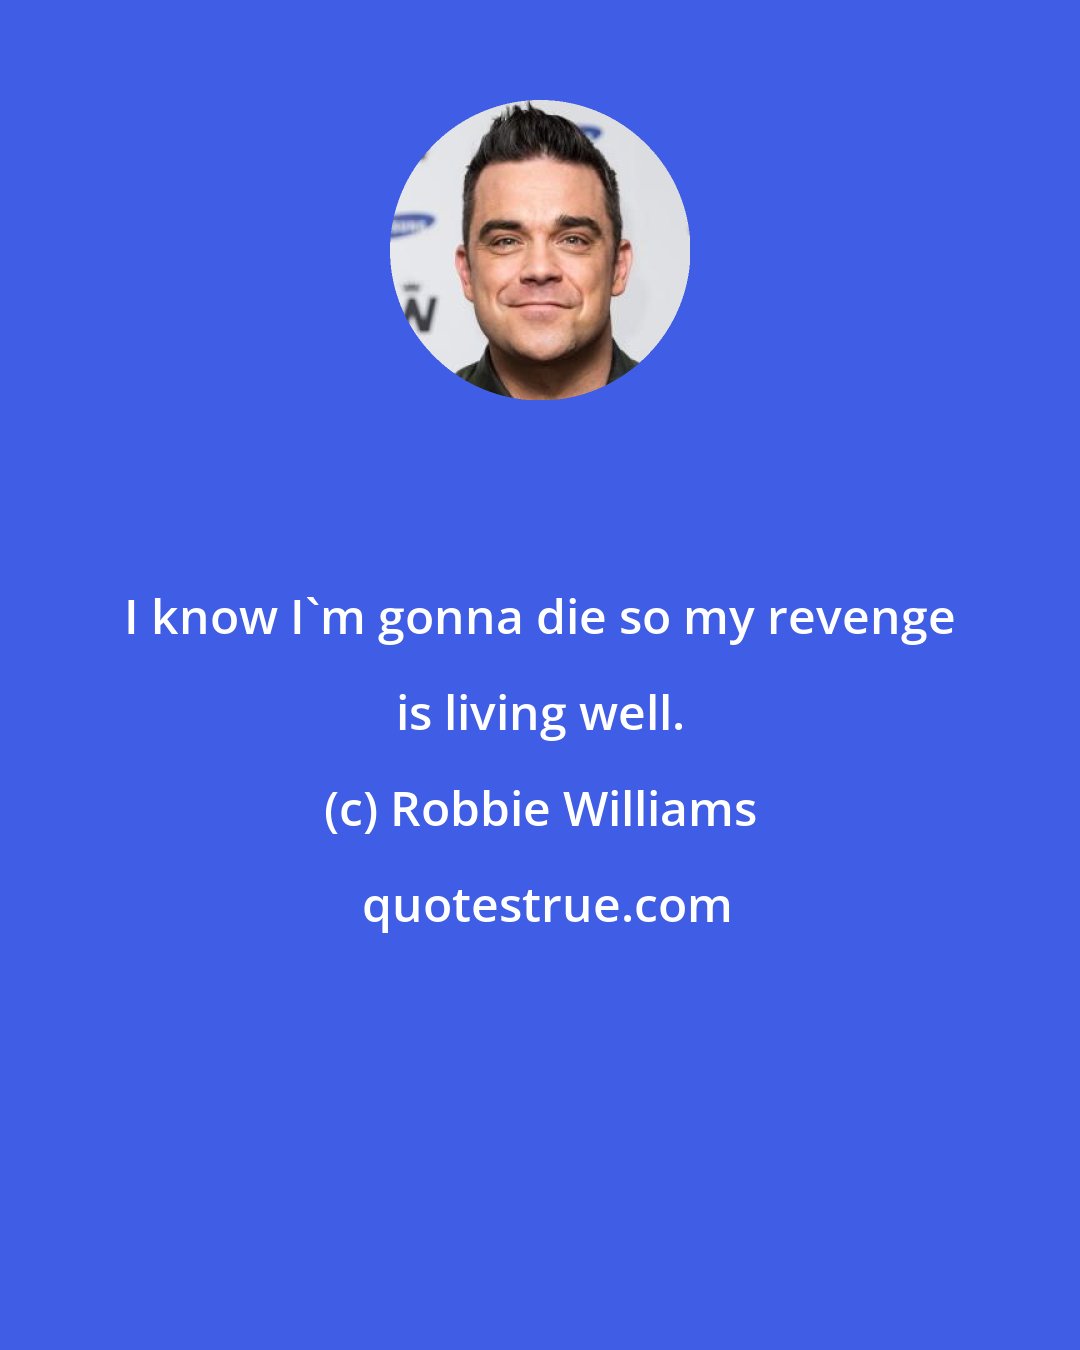 Robbie Williams: I know I'm gonna die so my revenge is living well.